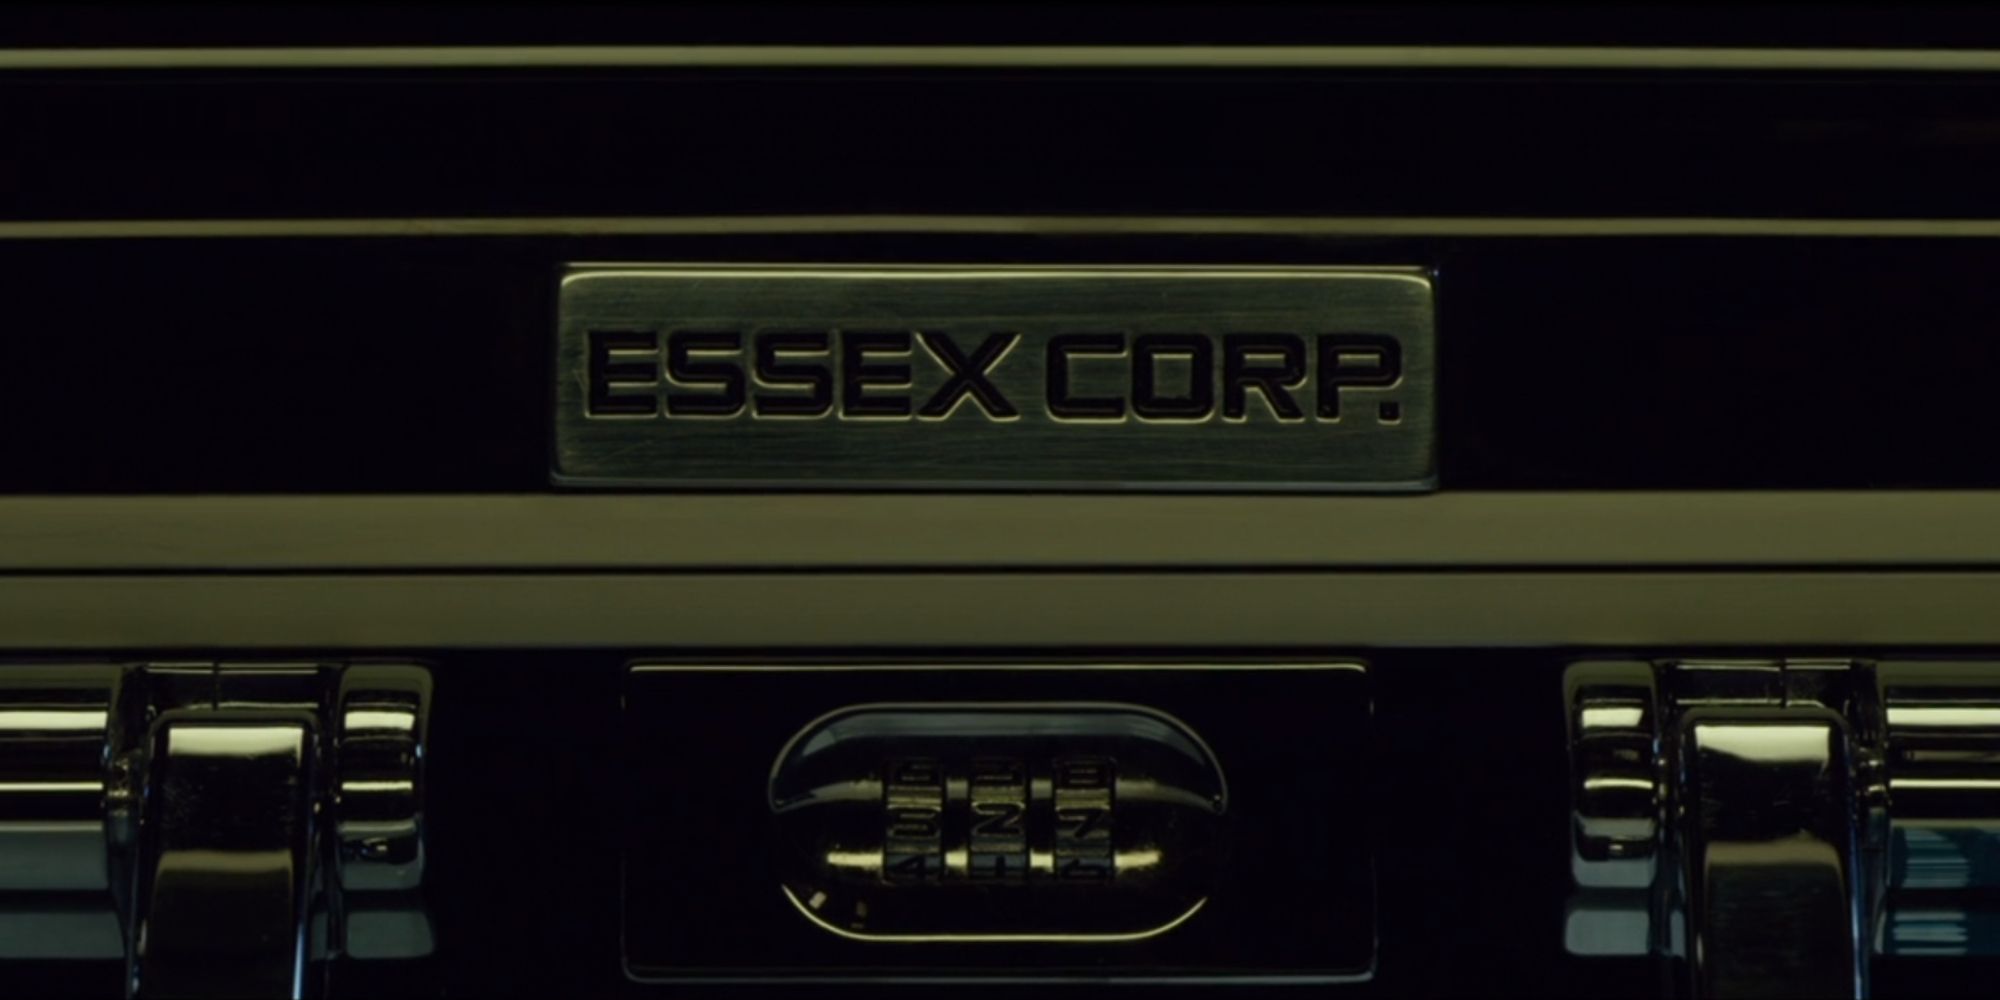 A briefcase with the Essex corporation logo in X-Men Apocalypse